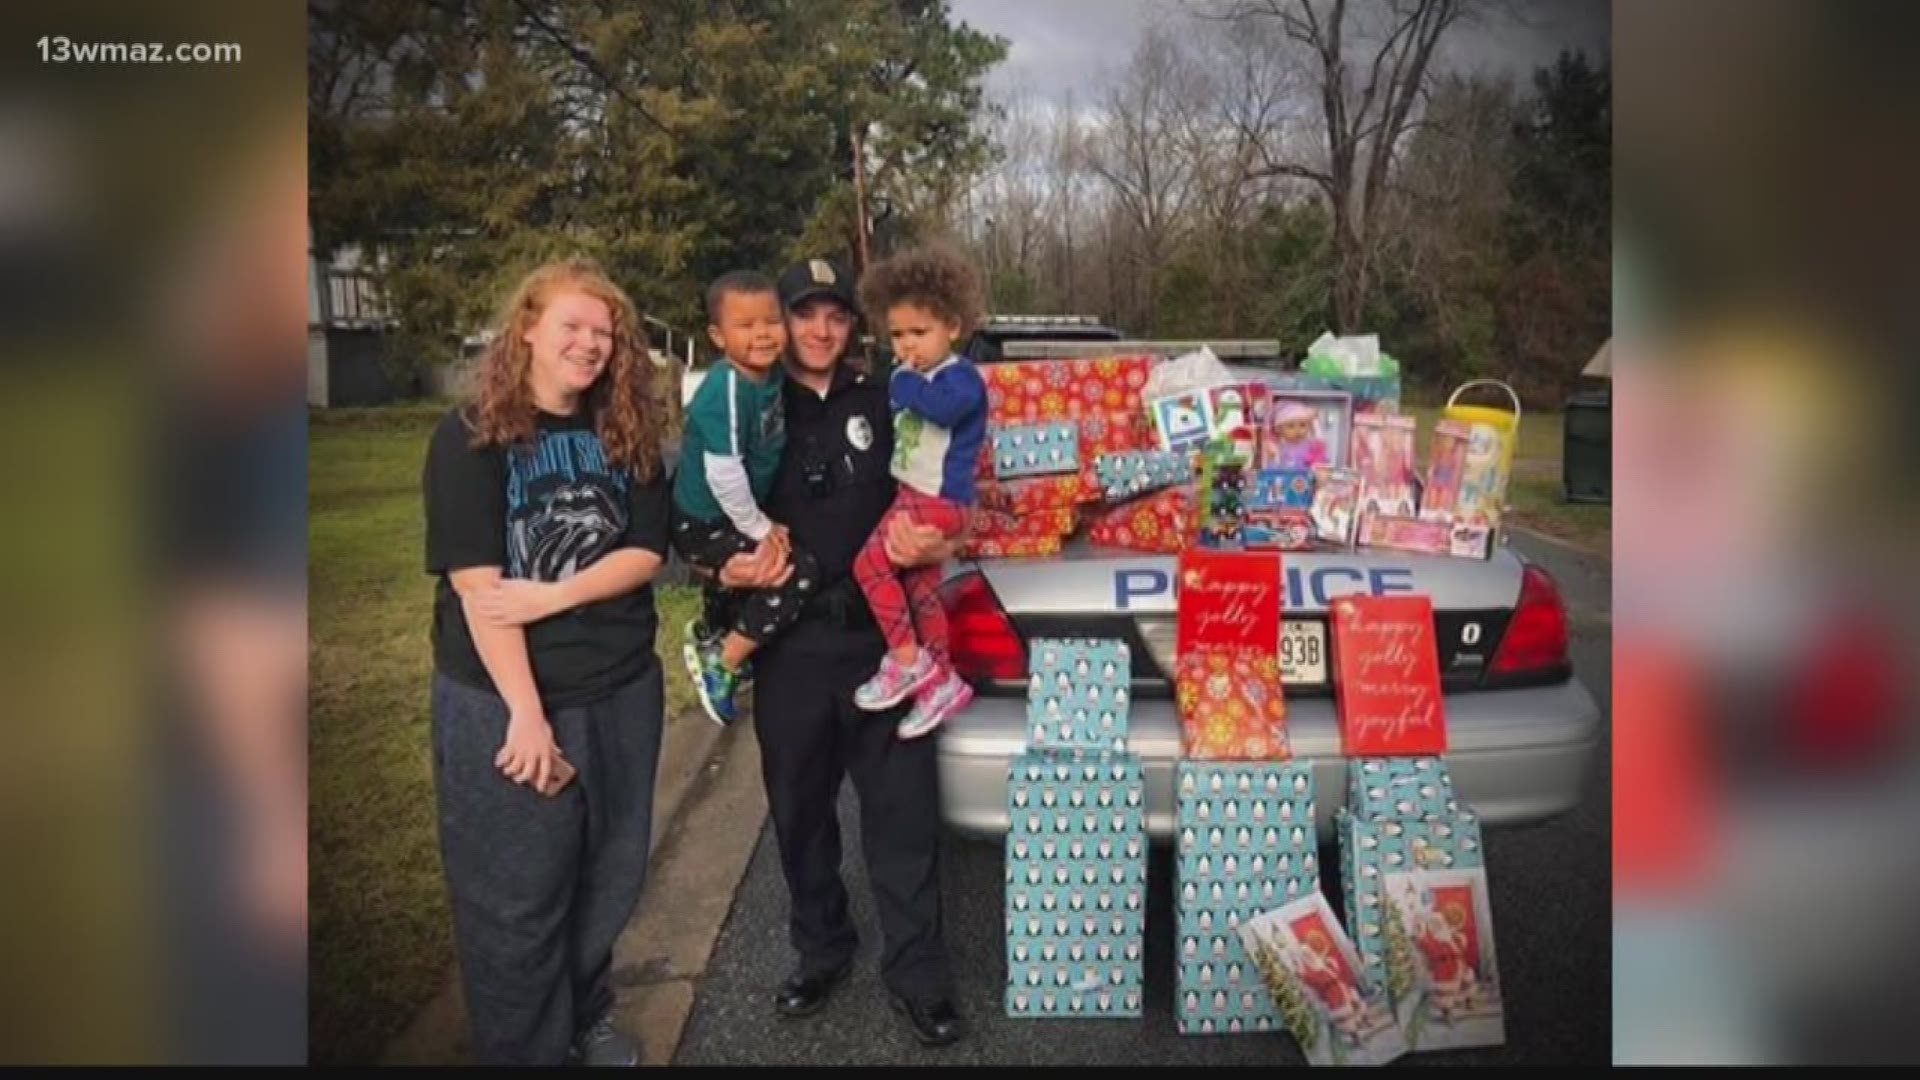 While answering a call, Officer Atkins met a family that couldn't afford presents this year